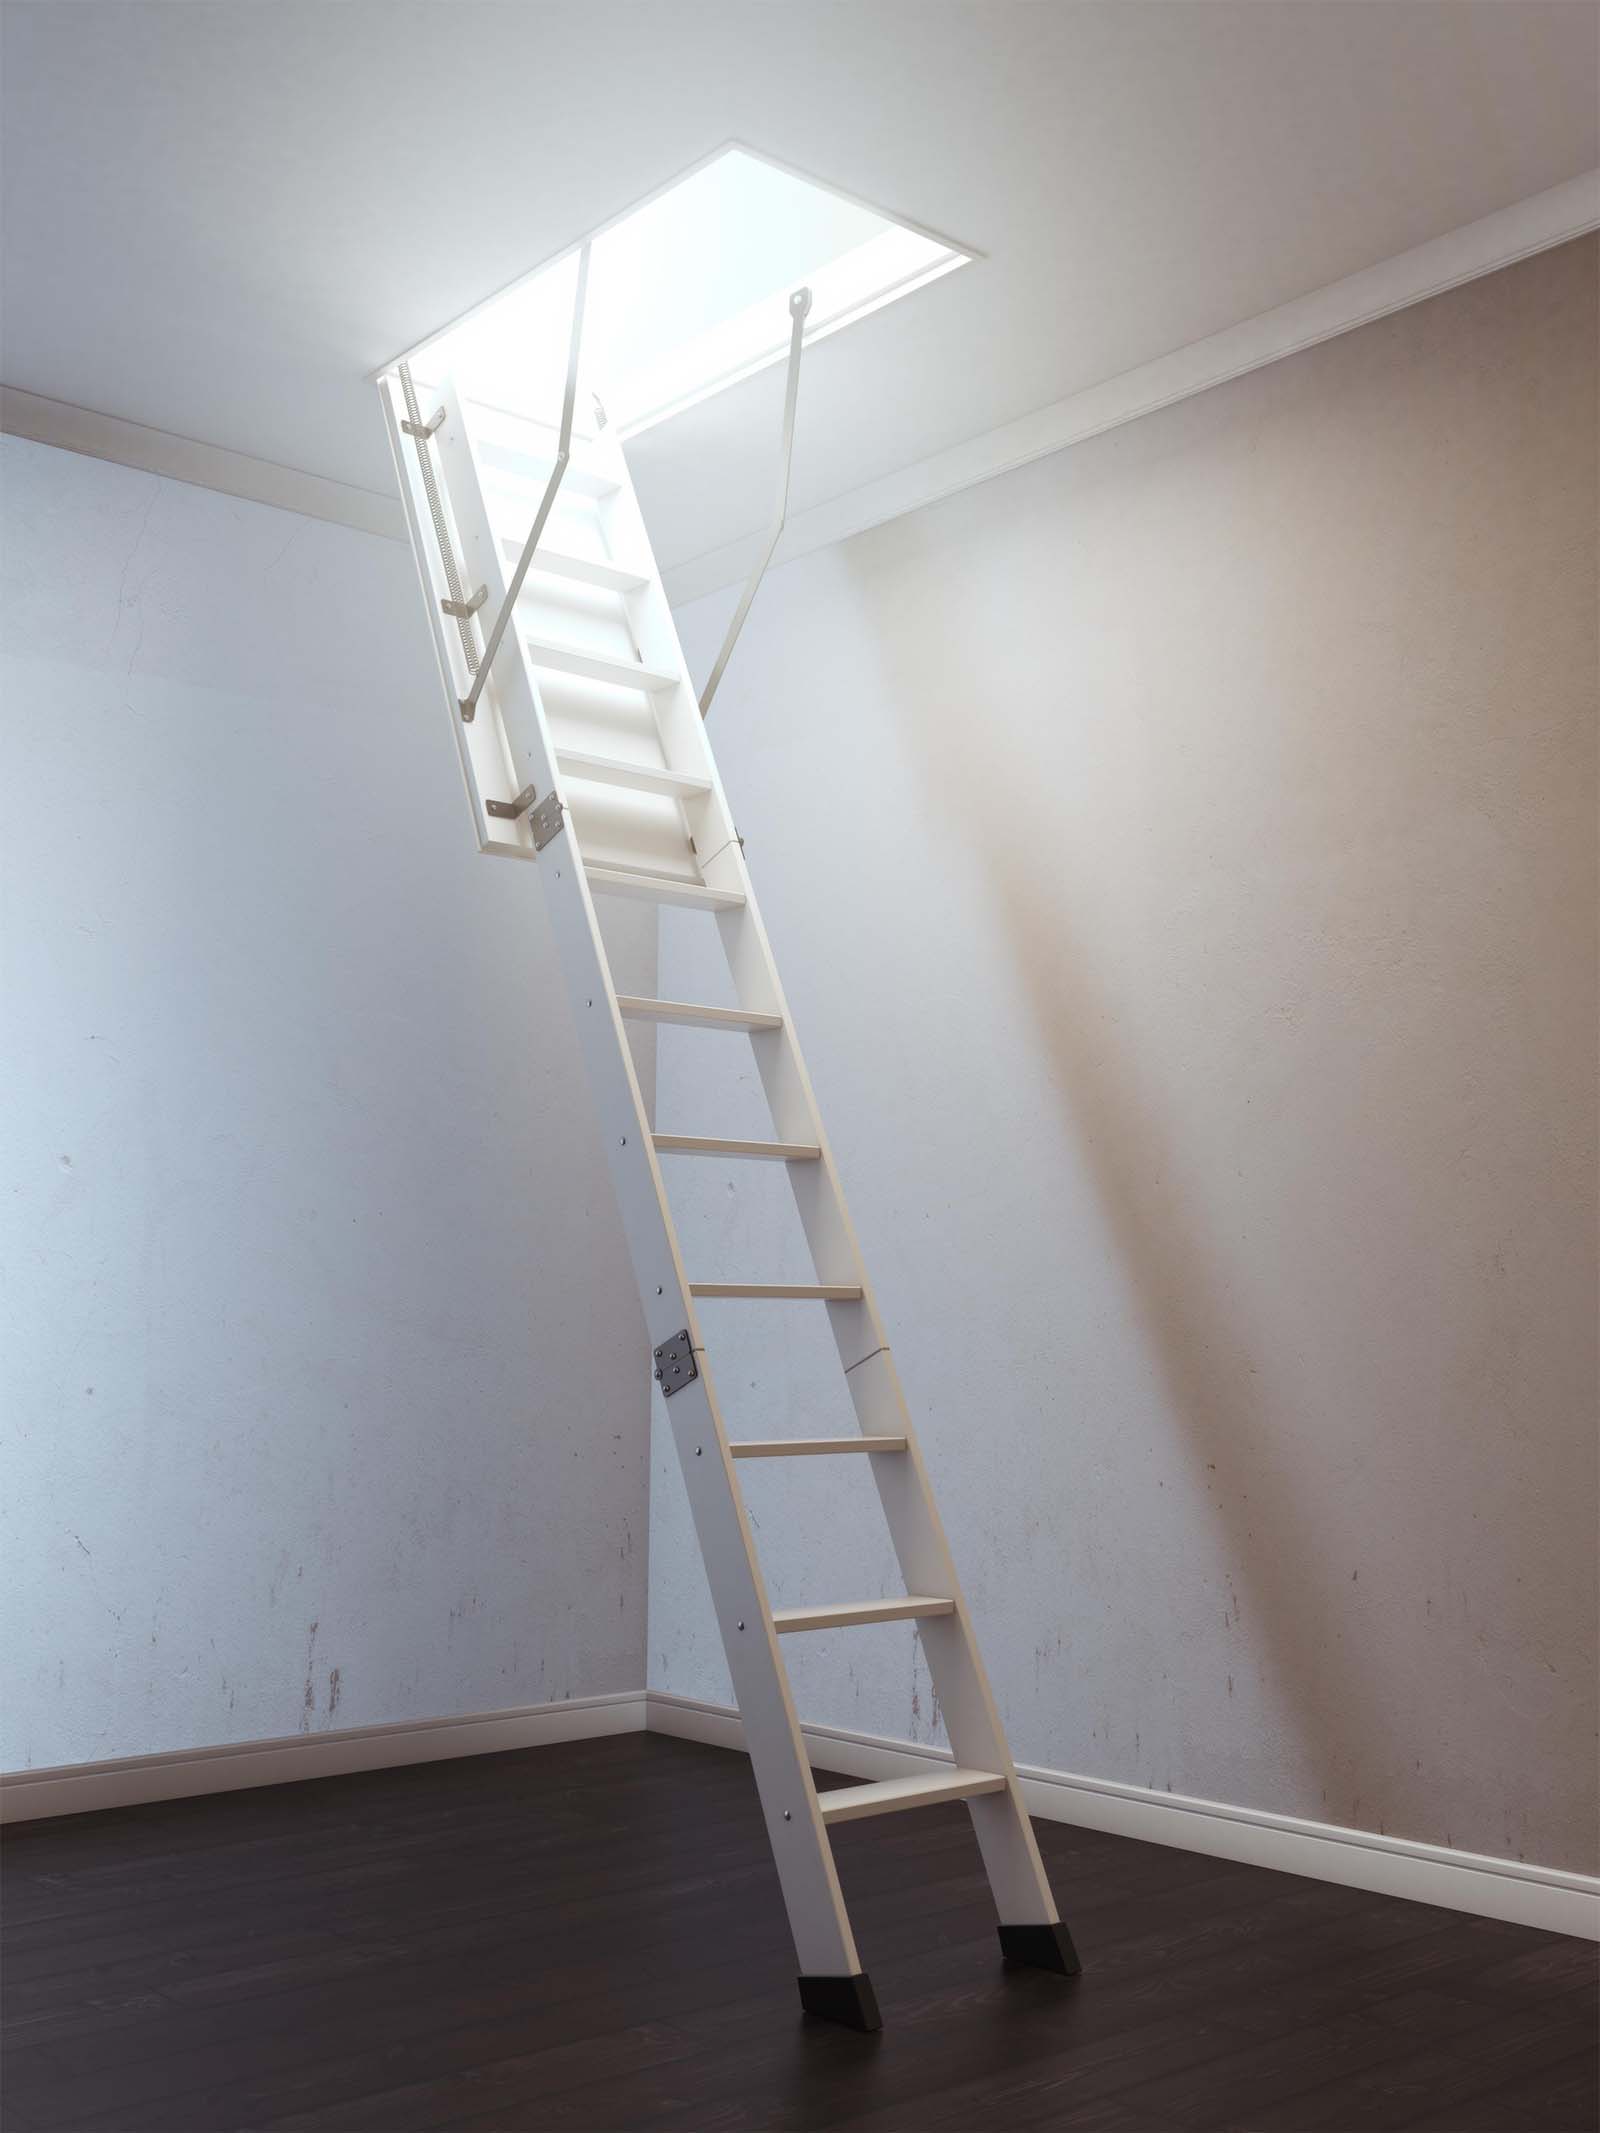 Attic Ladder Installed To Access A Ceiling Space